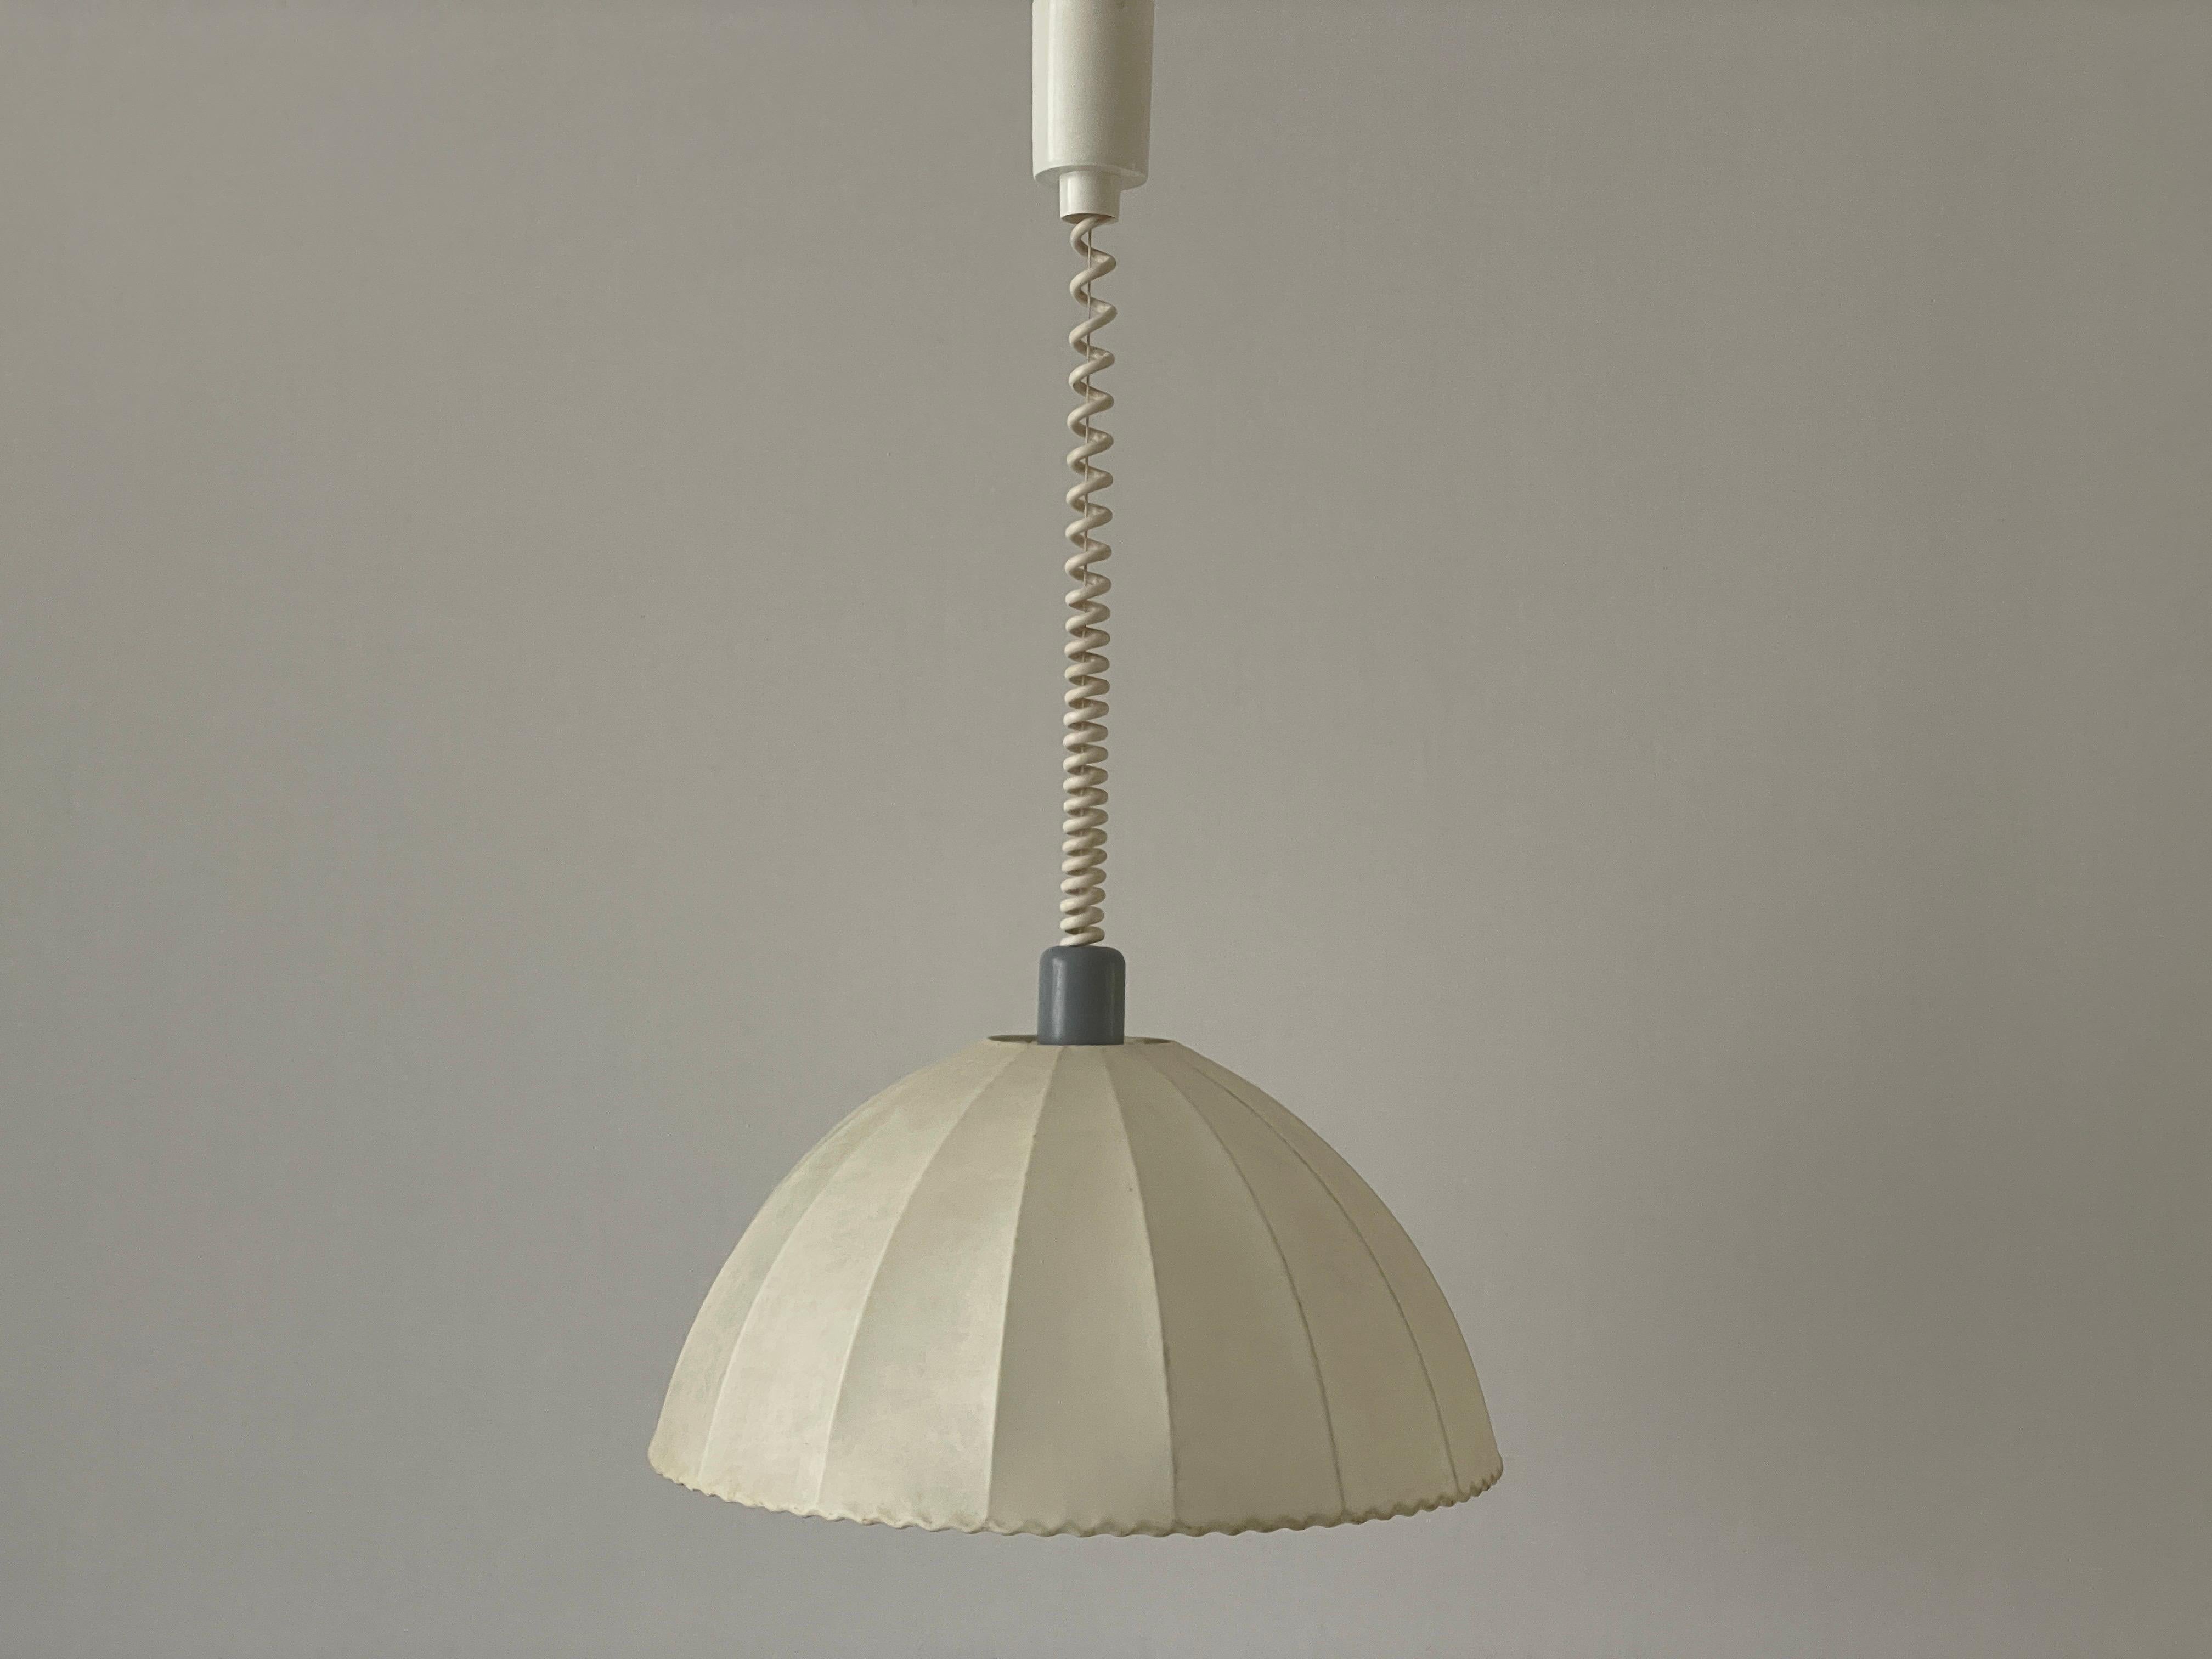 Cocoon Pendant Lamp by Goldkant with Grey Metal Top, 1960s, Germany For Sale 1